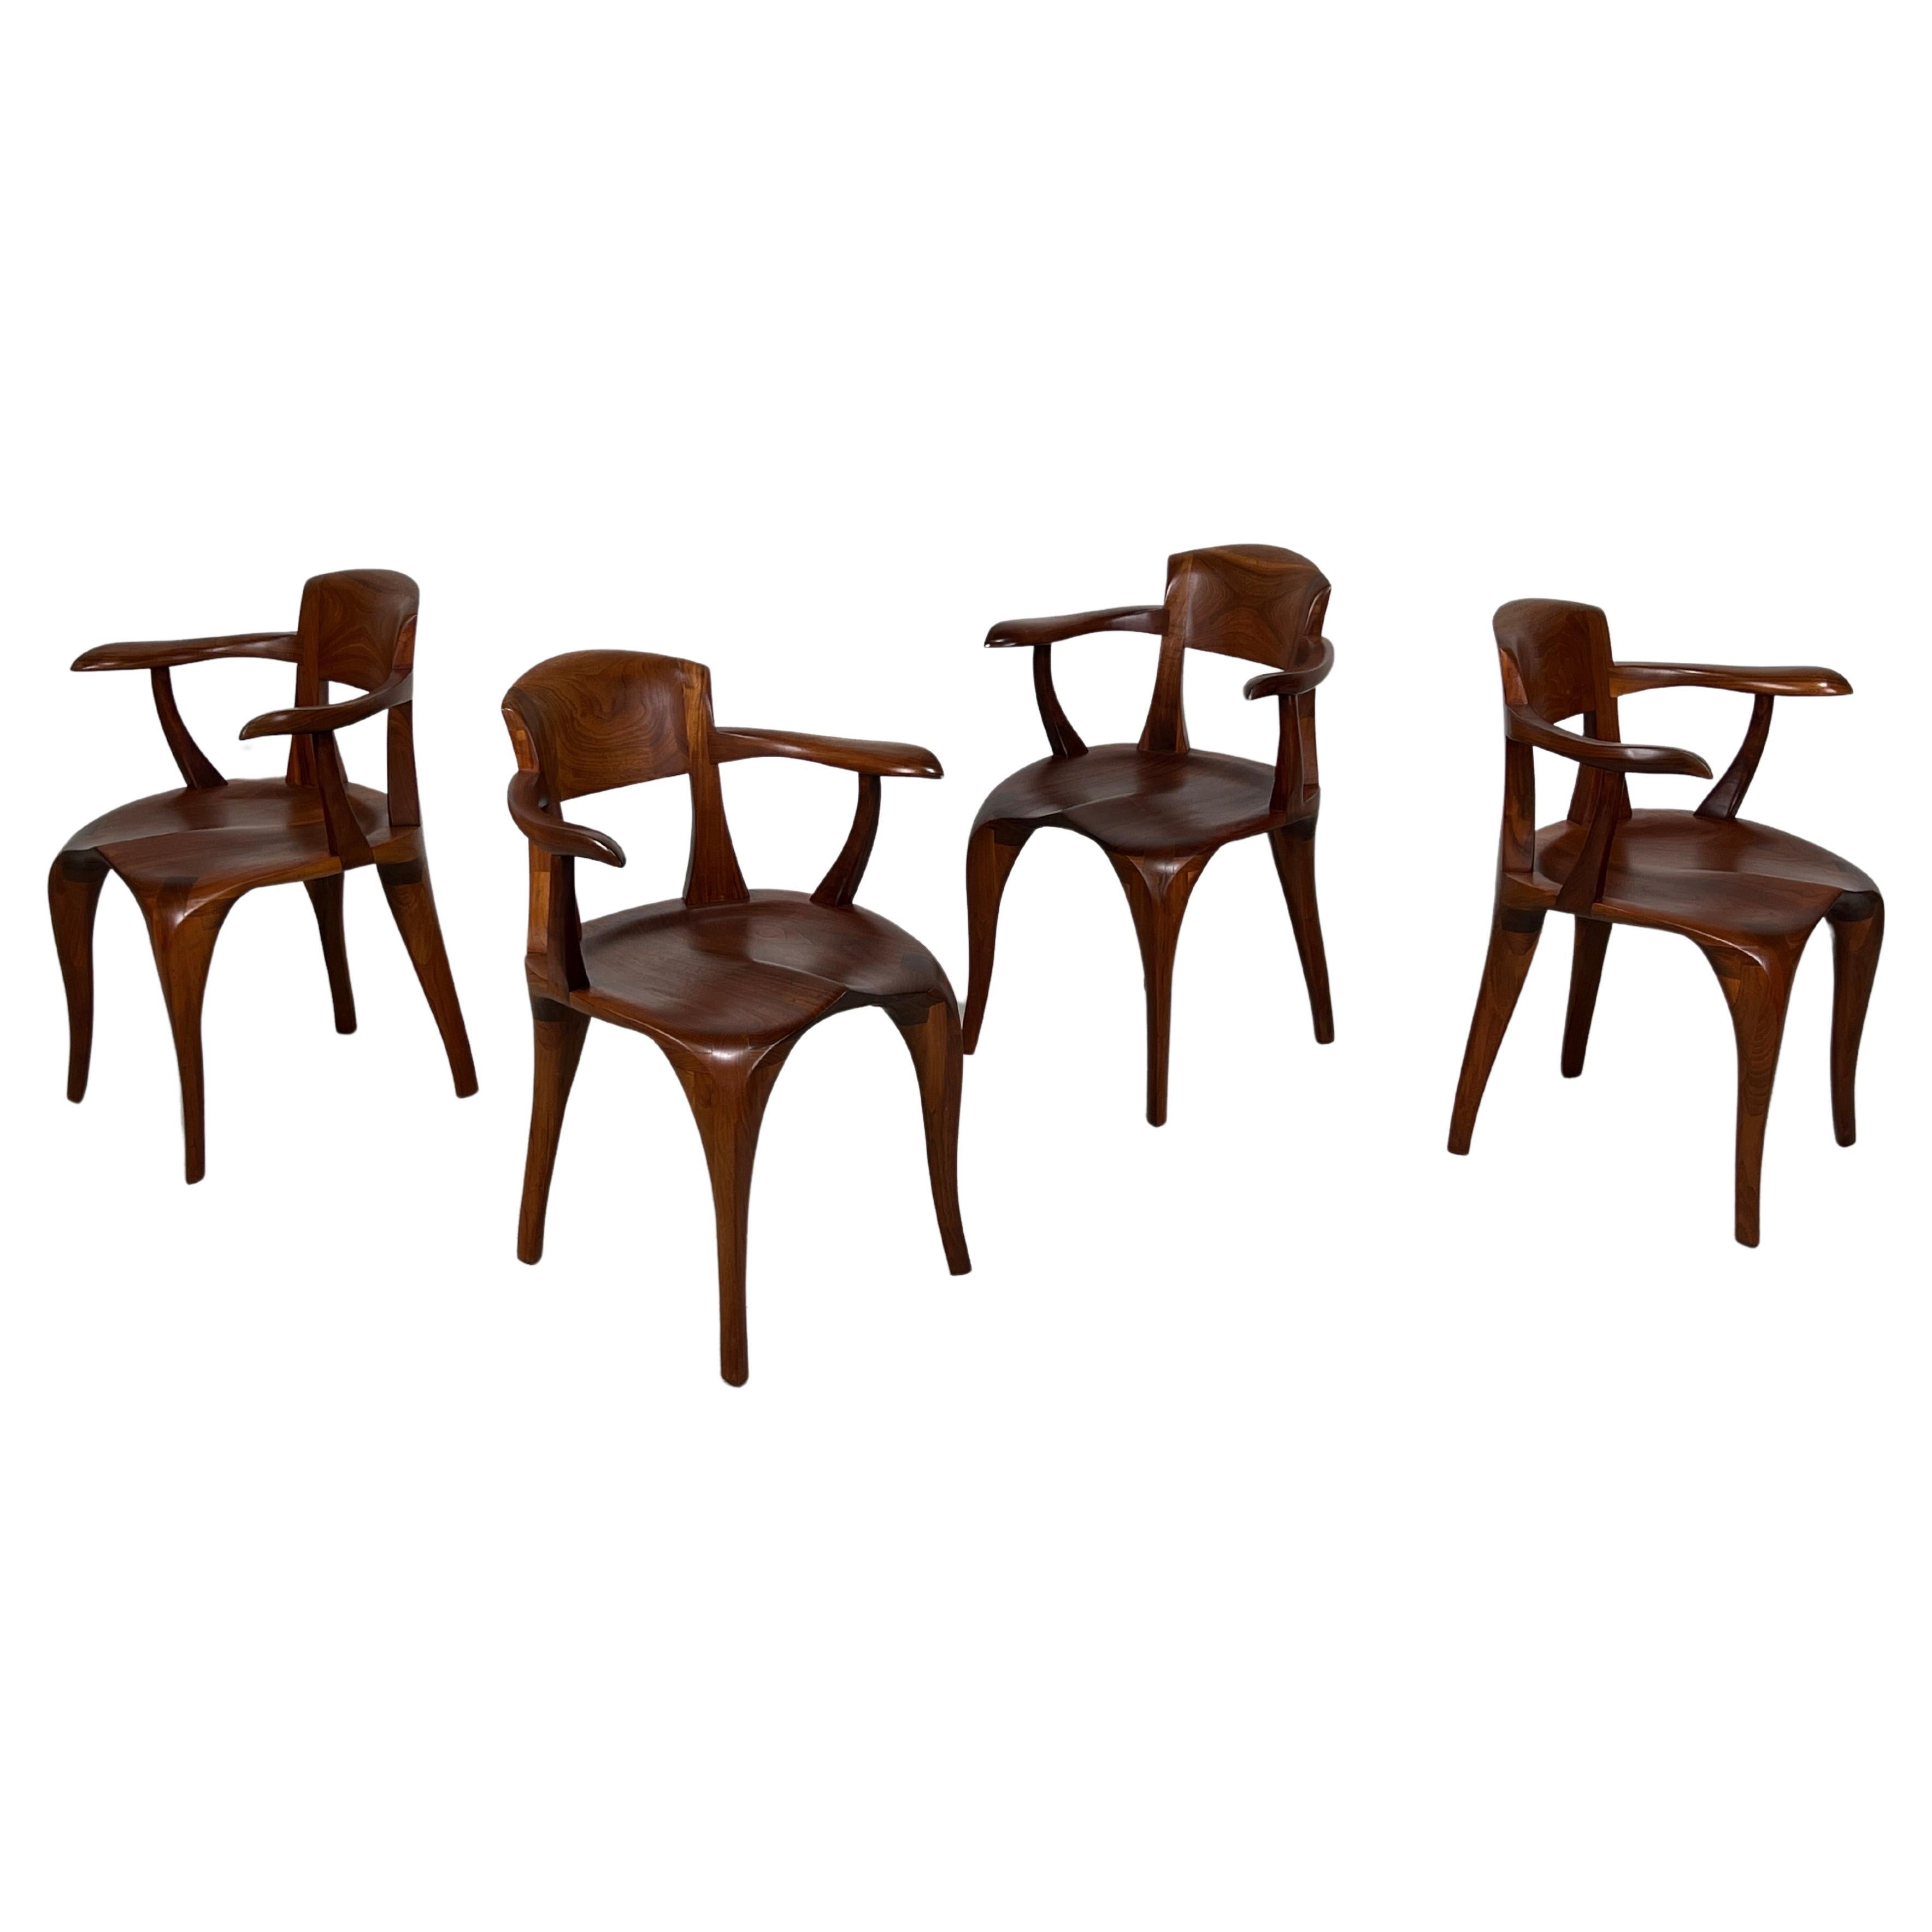 Four Studio Craft Chairs by Victor DiNovi  For Sale